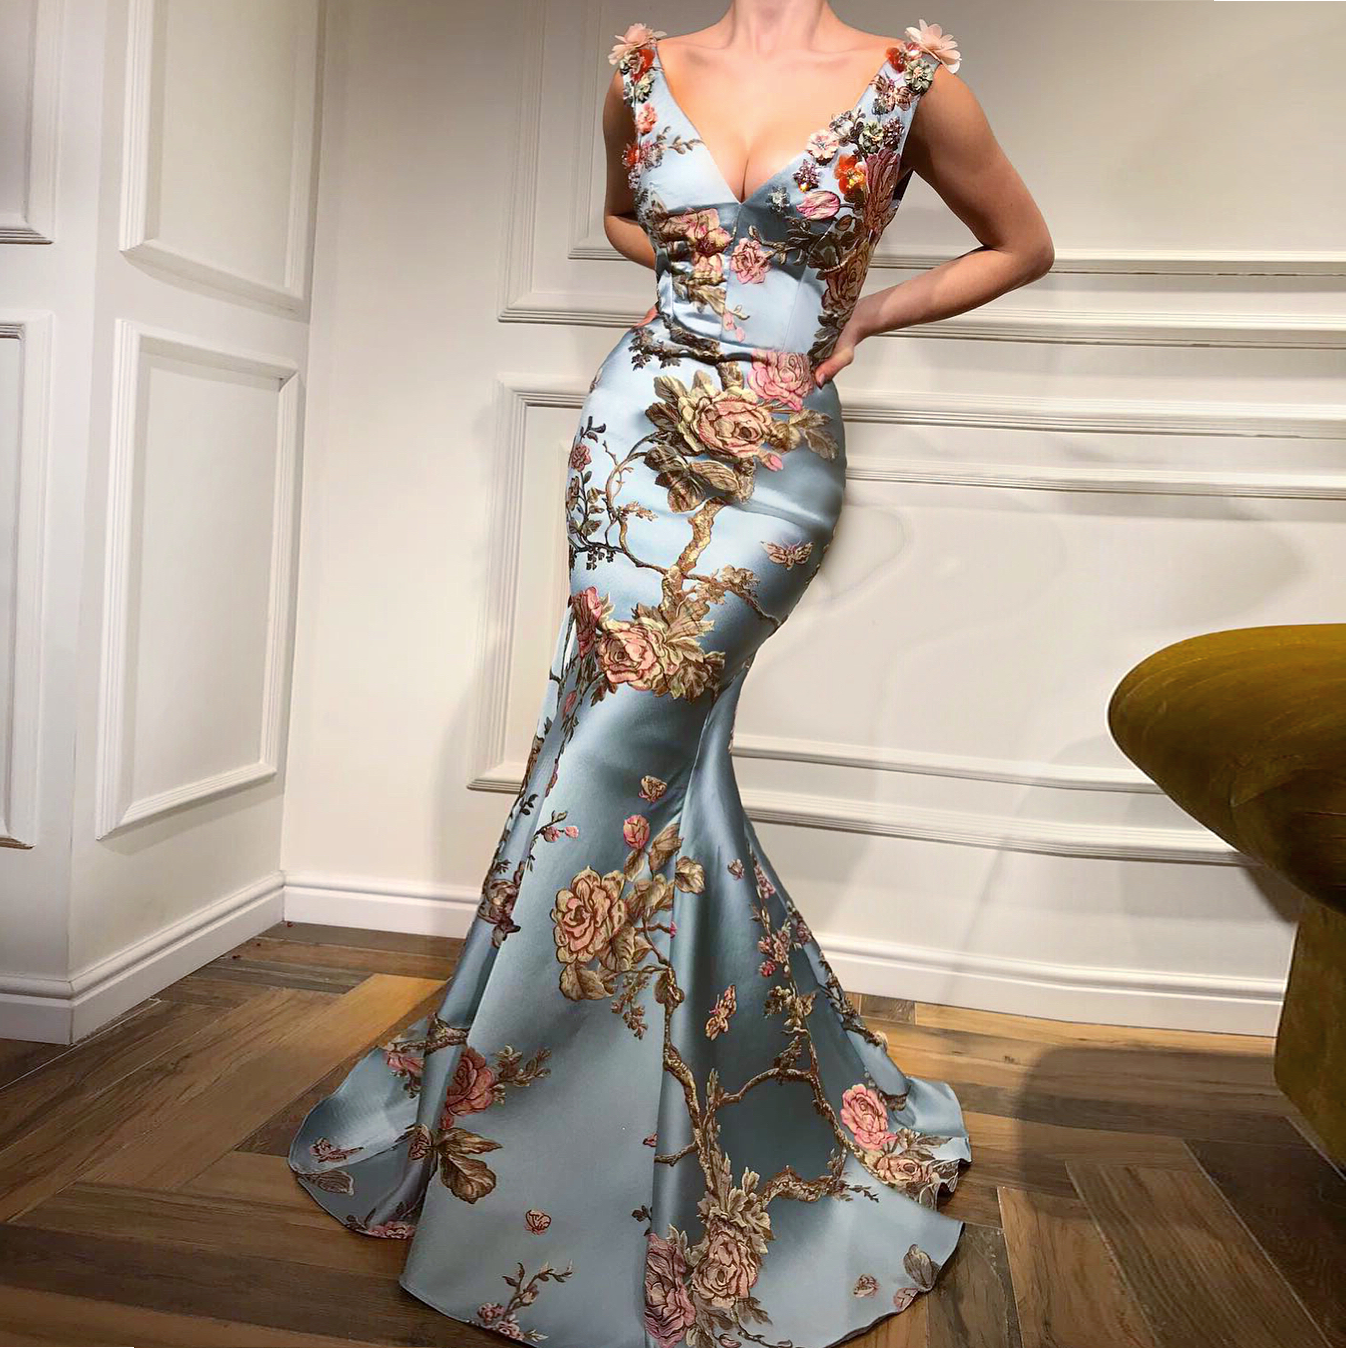 Sexy sleeveless  Embroidery Printed Fishtail Dress